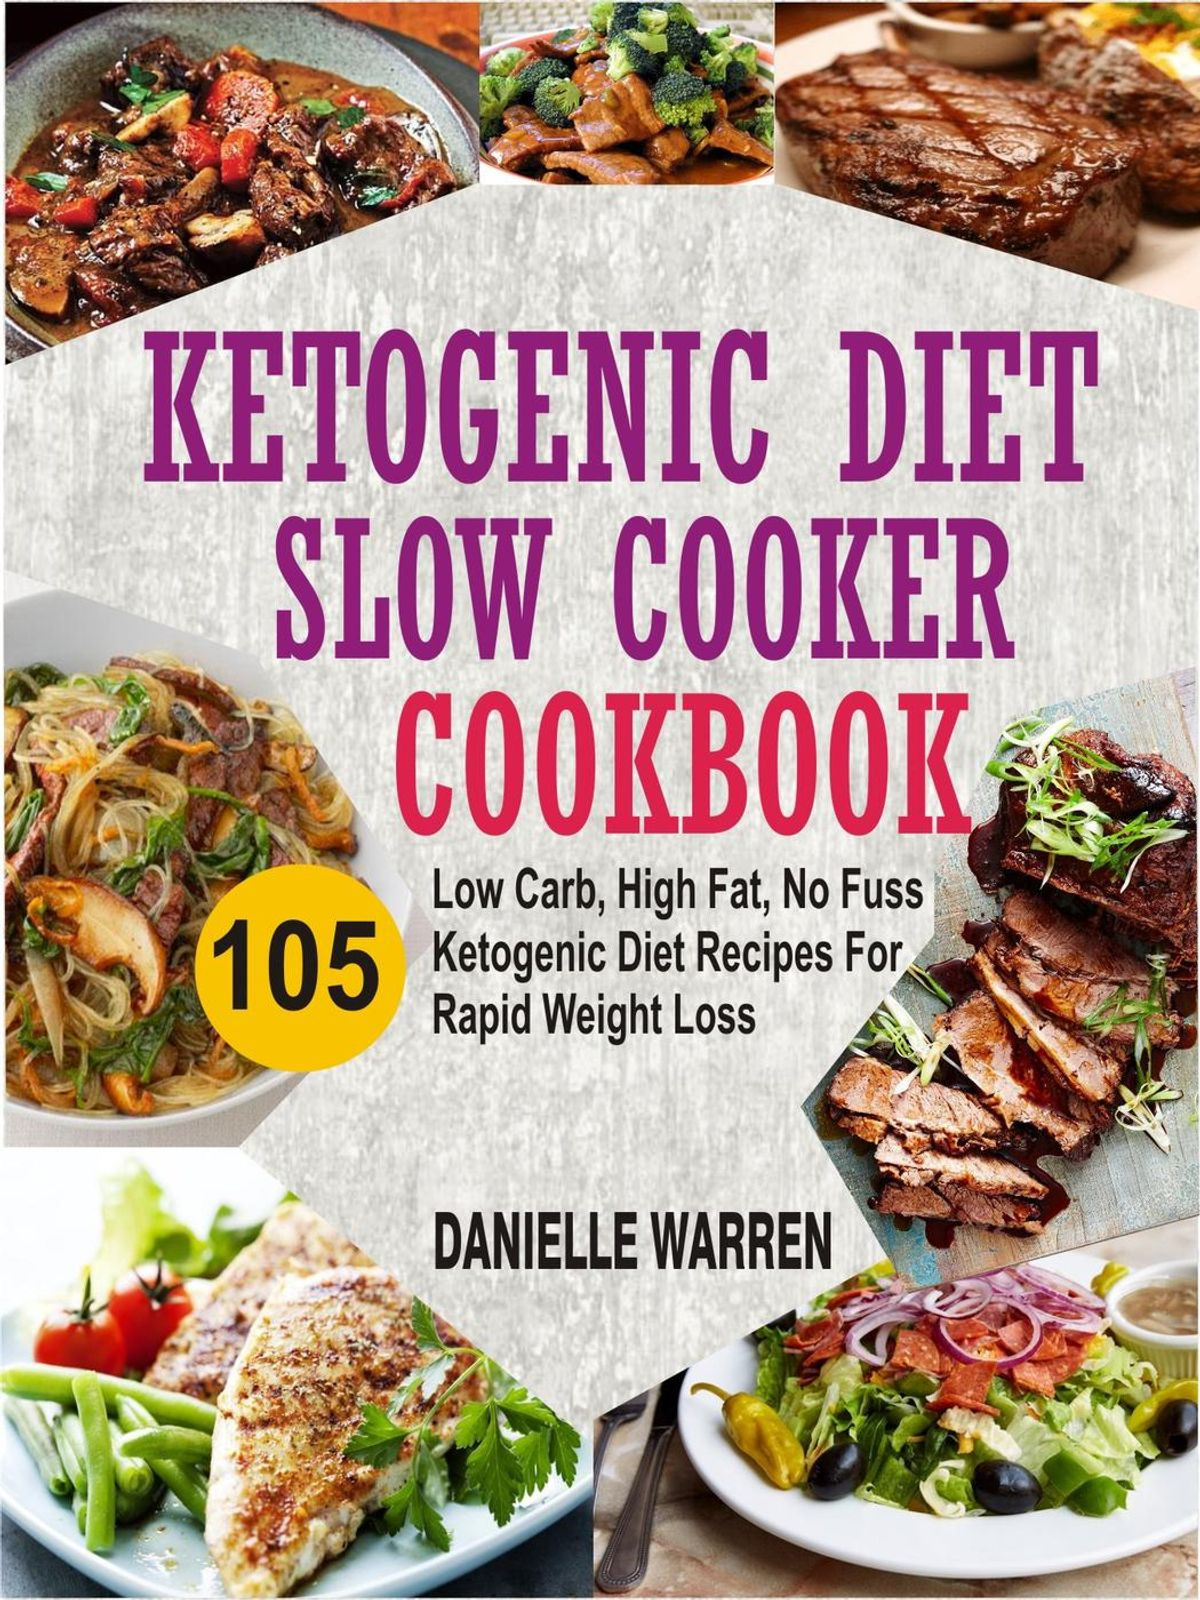 Keto Diet Recipes Slow Cooker
 Ketogenic Diet Slow Cooker Cookbook 105 Low Carb High